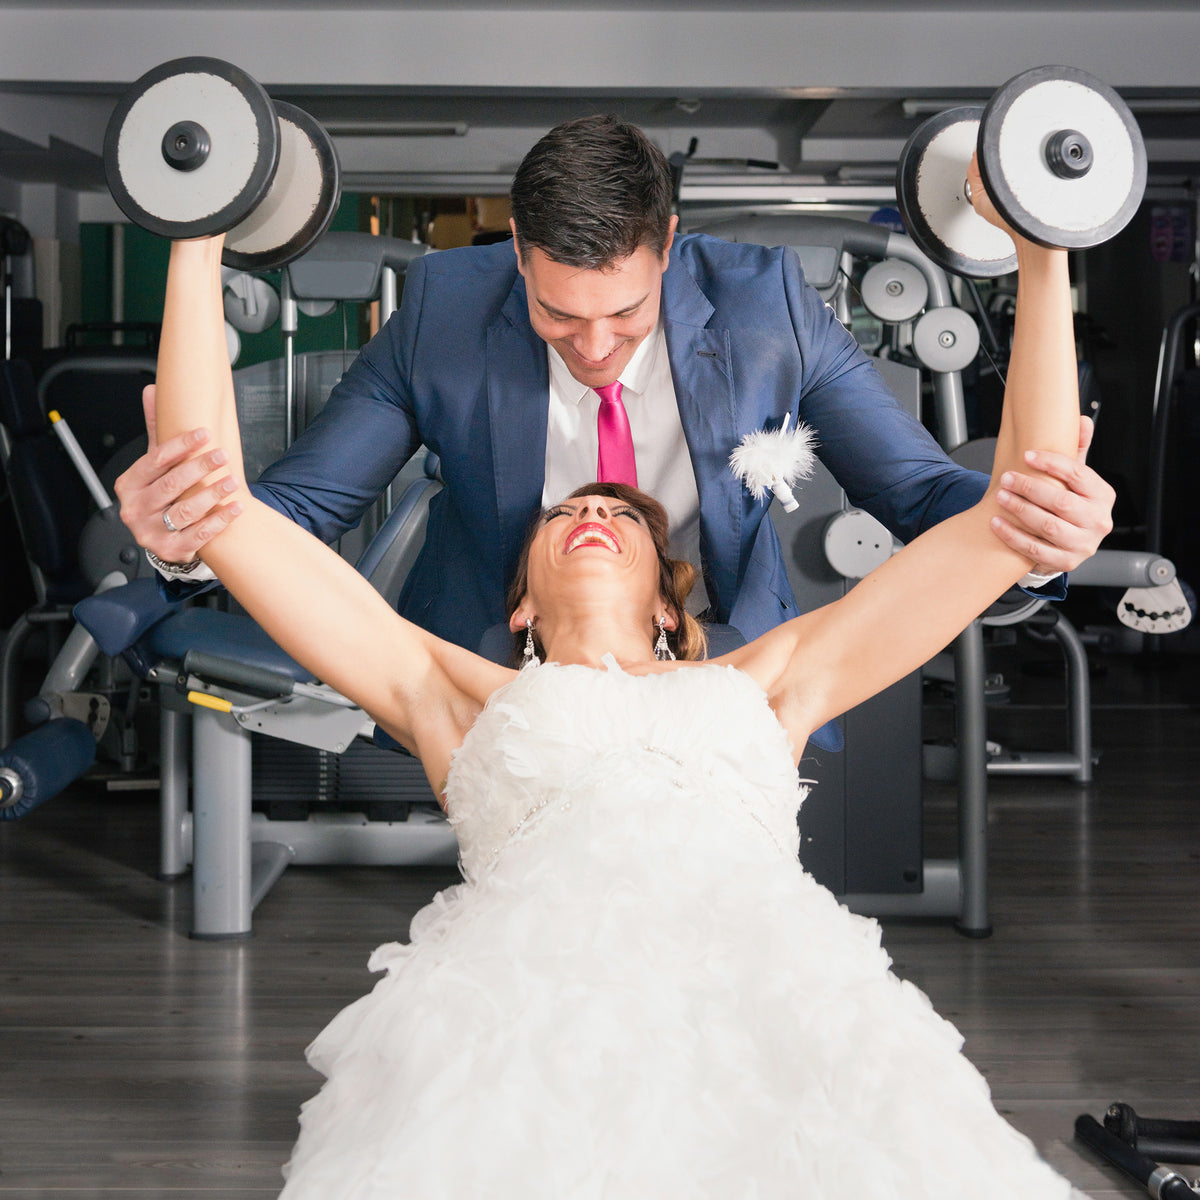 Wedding Diet and Fitness Tips Q&A With Coach Lee